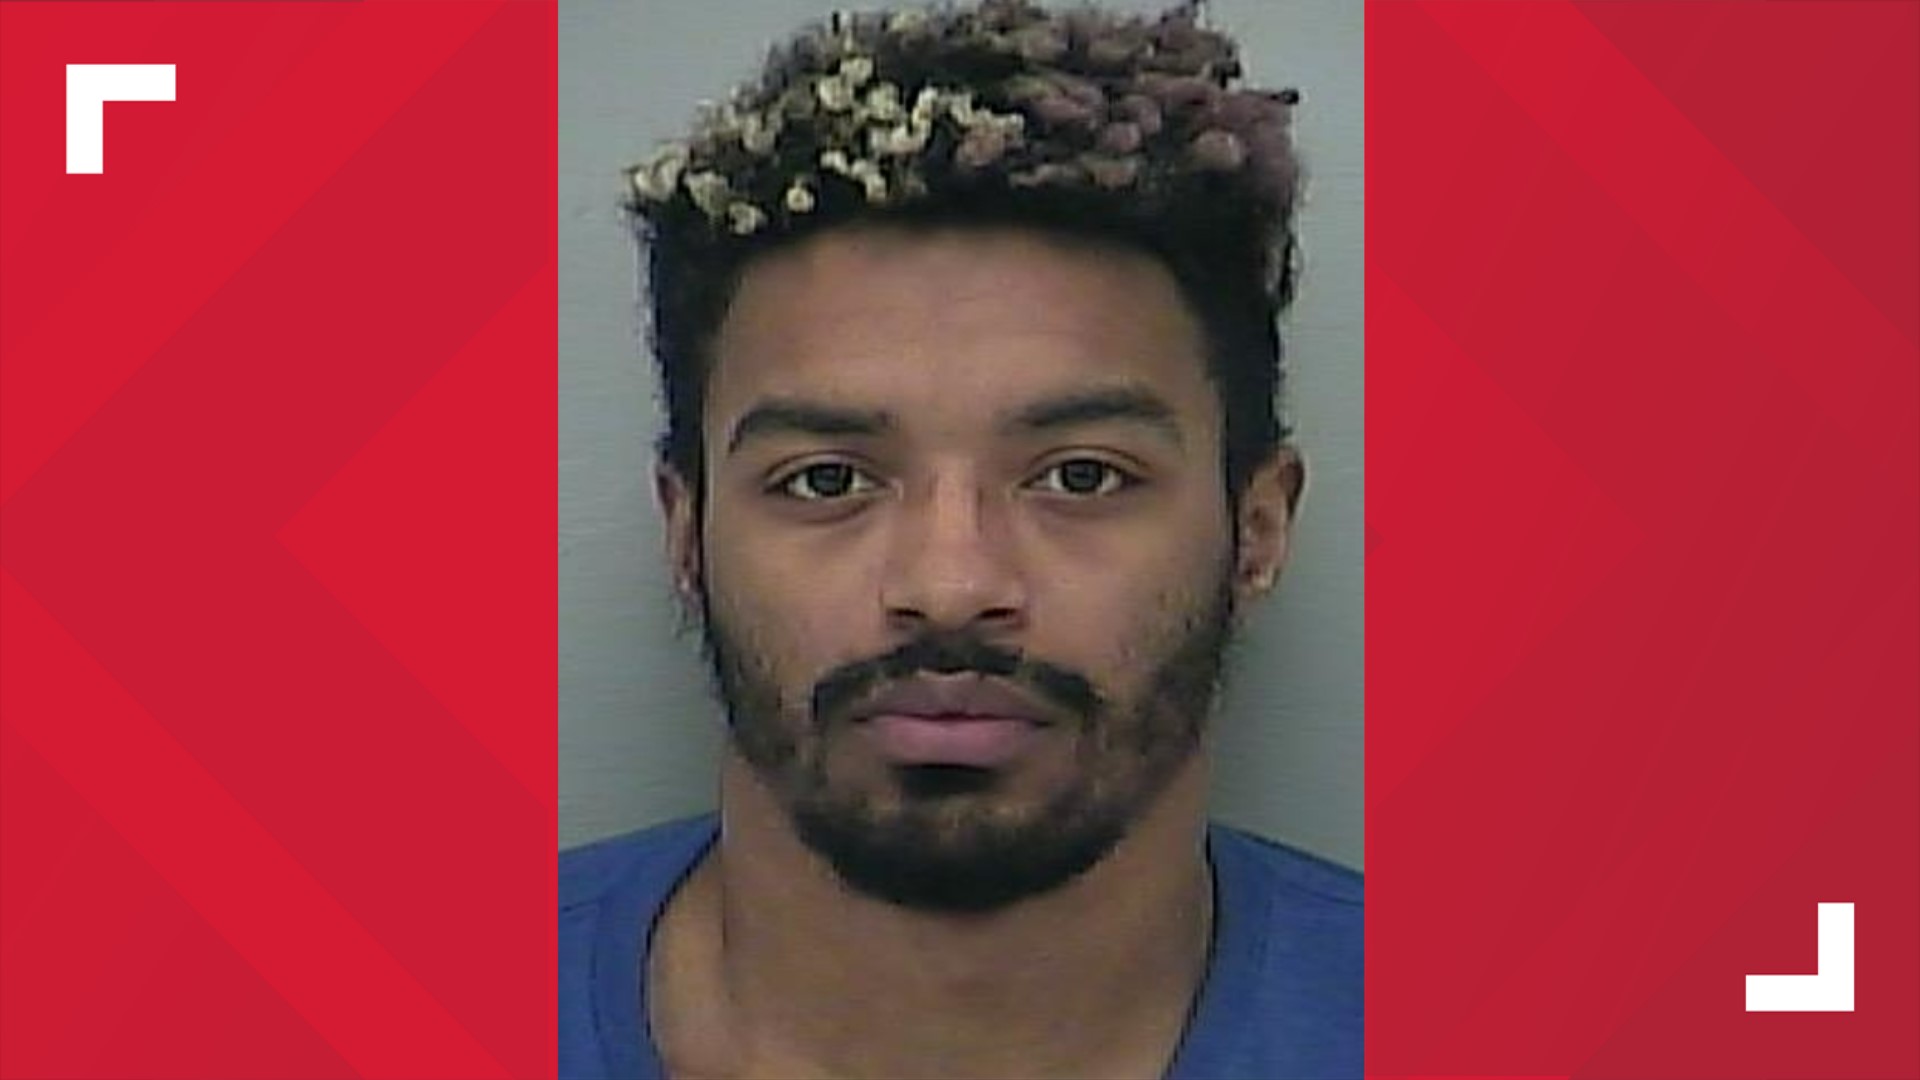 A third suspect was indicted in connection with a shooting at an AutoZone store near Polaris last summer where a man was killed while attempting to stop a robbery.